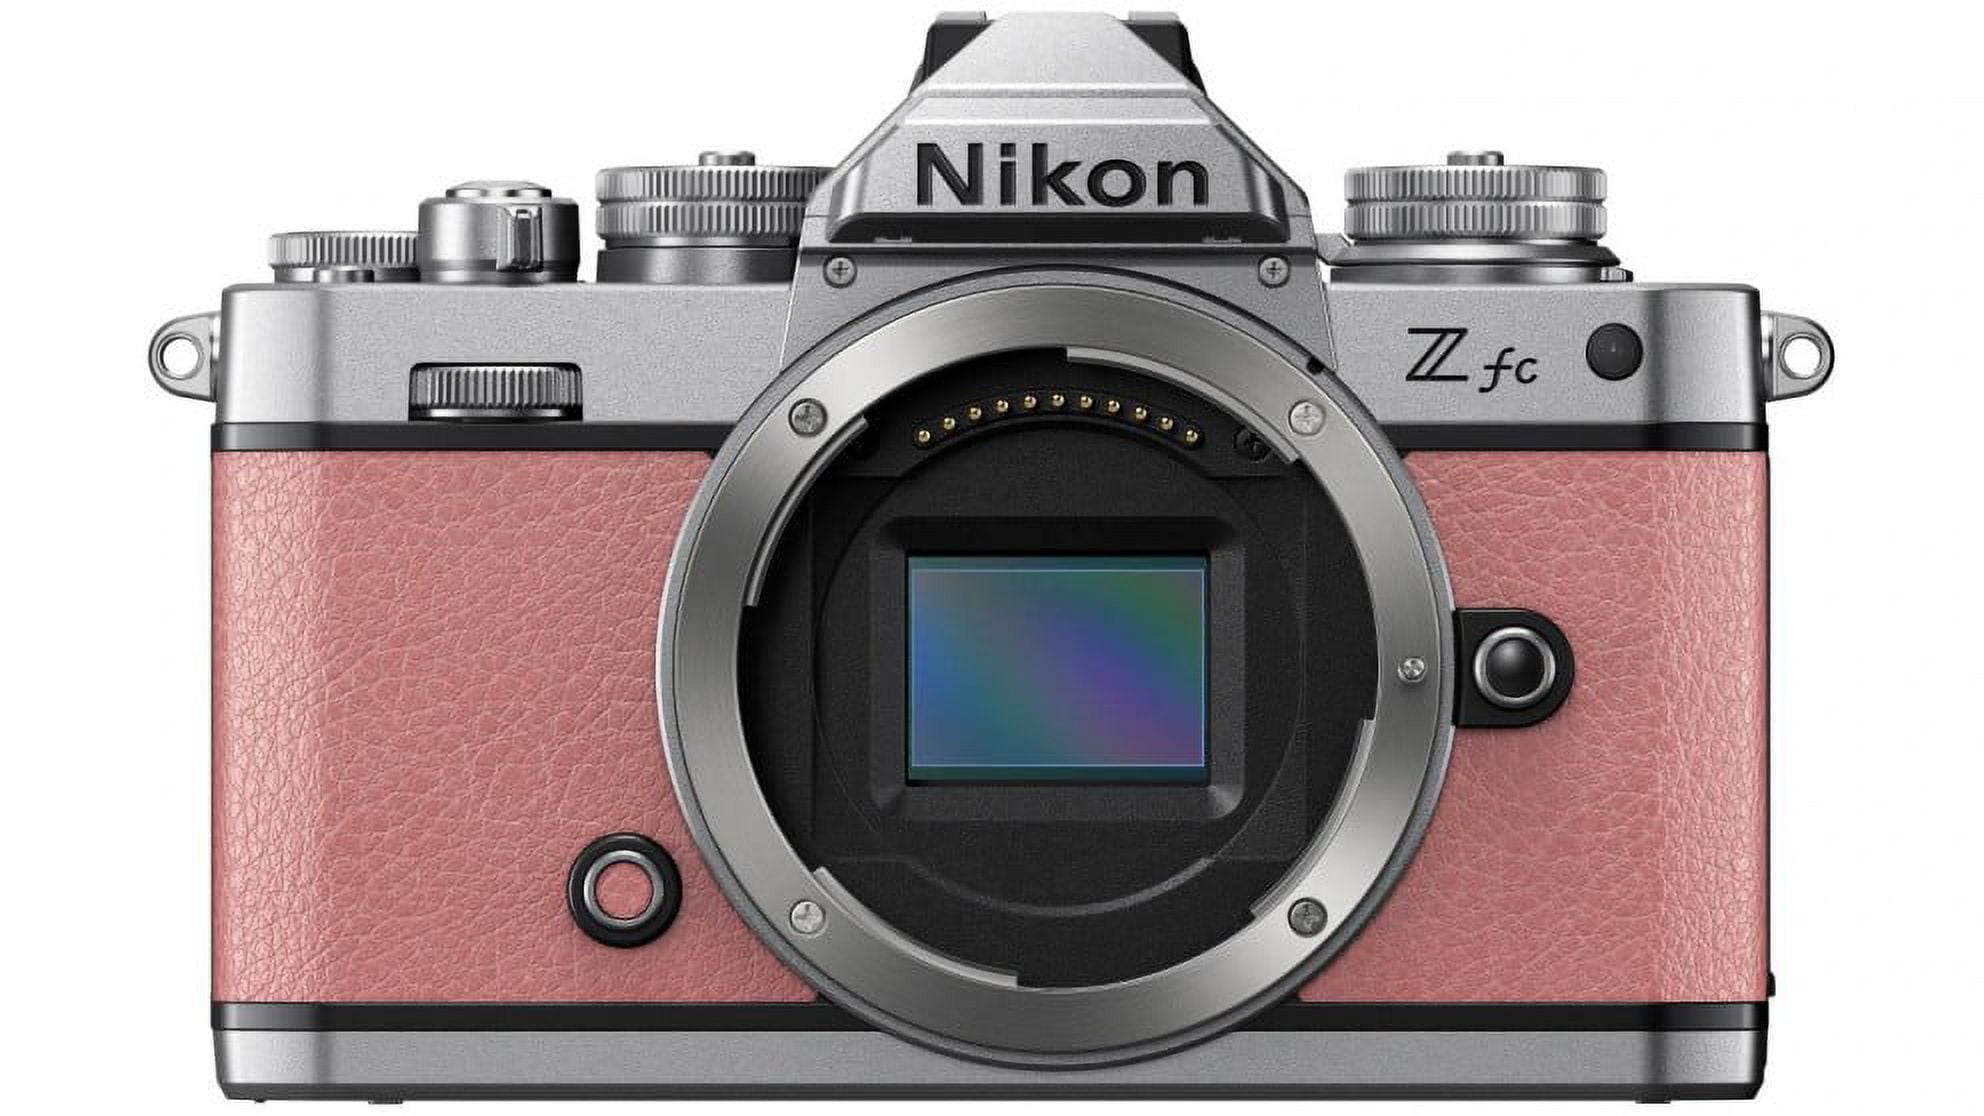 Nikon Z fc Mirrorless Digital Camera (Body Only) (Coral Pink, ZFC095AA)  International Model Bundle with 64GB Extreme PRO SD Card + Camera Bag +  Editing Software + Padded Hand Strap + Cleaning Kit 